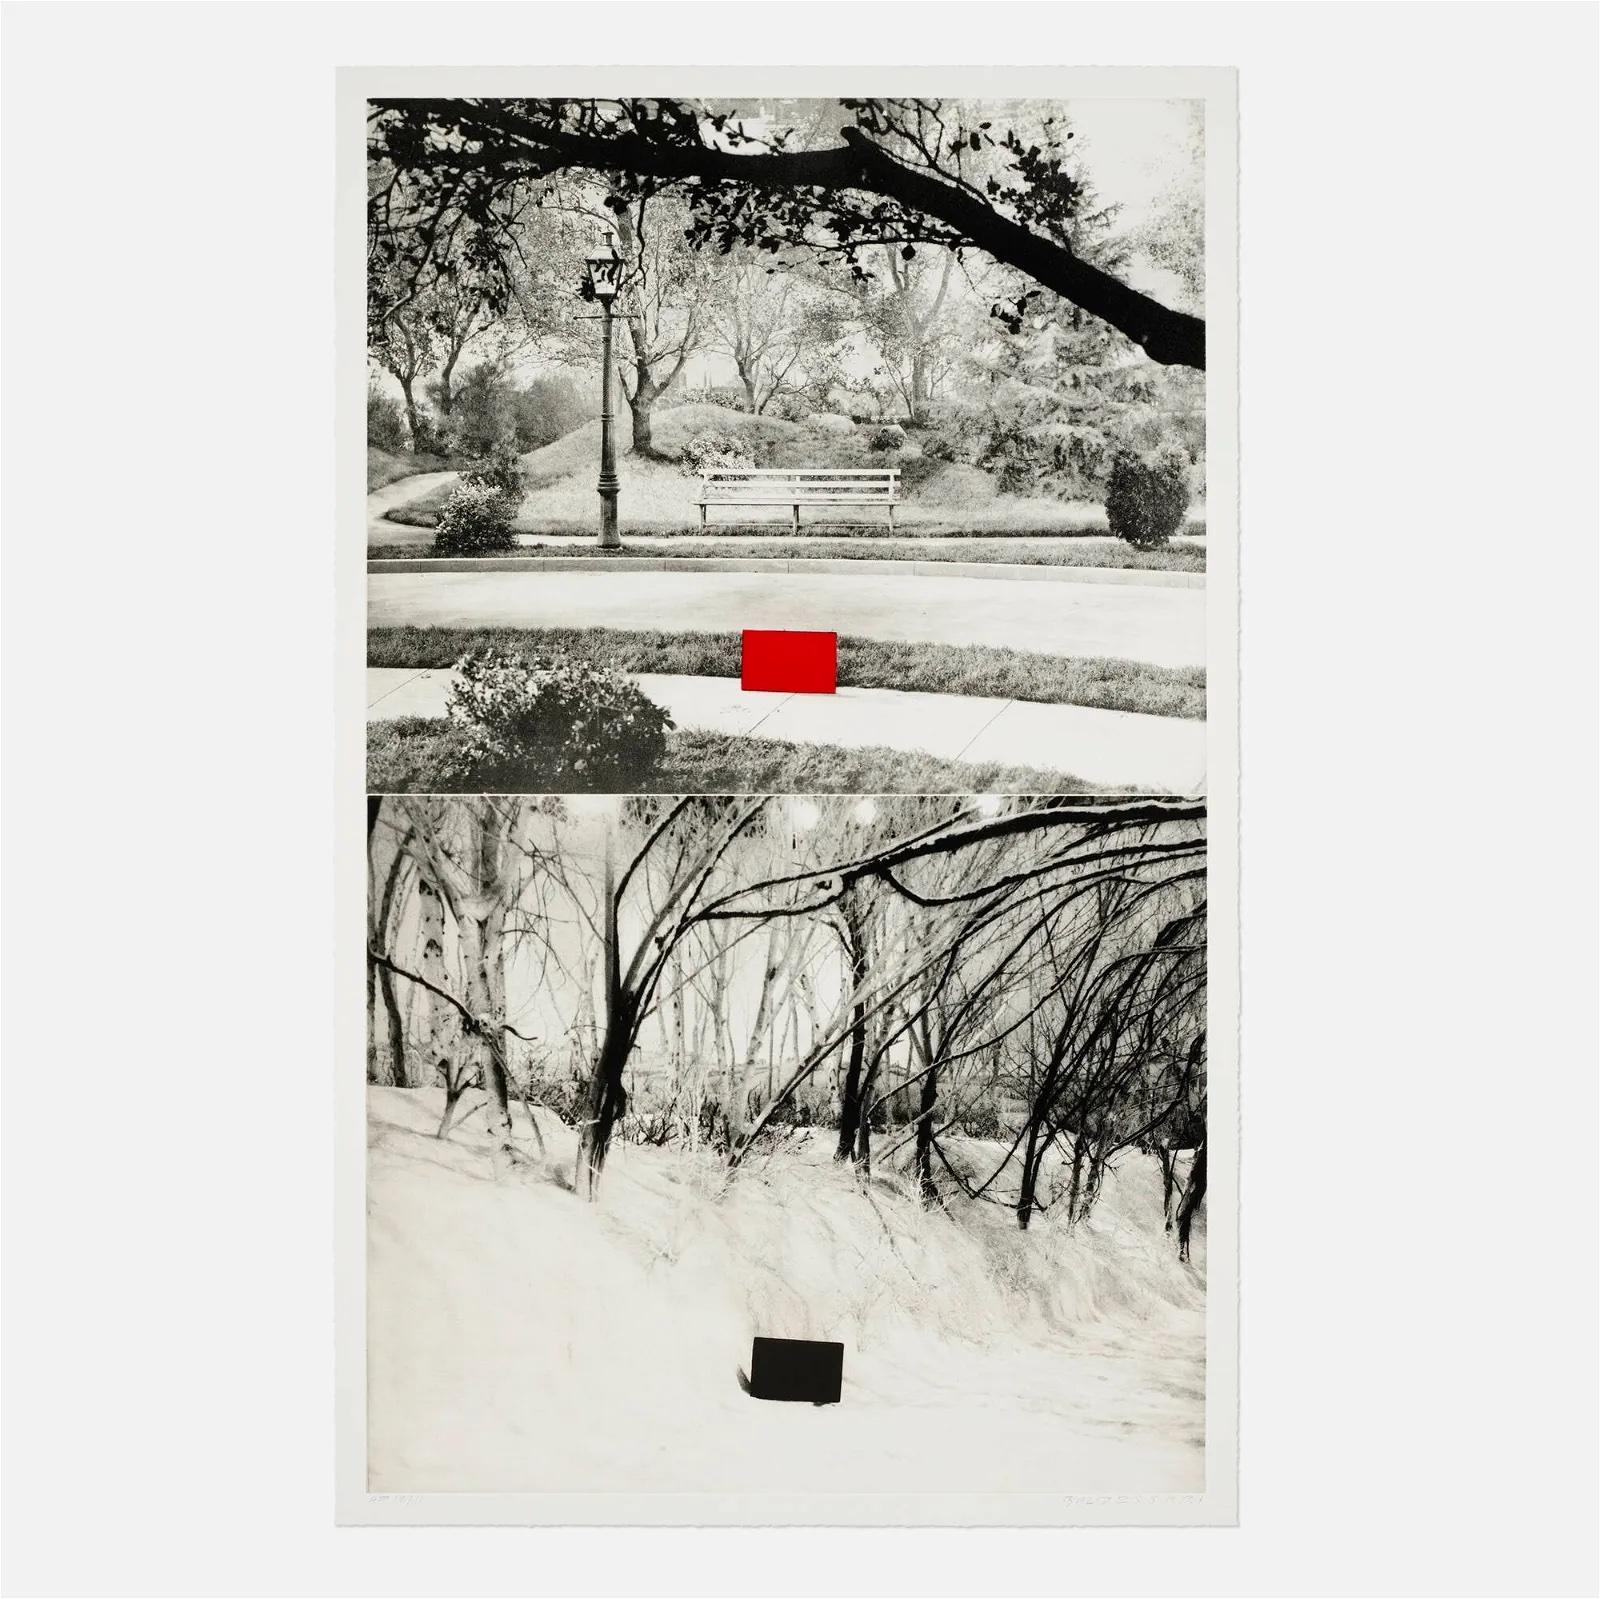 Two Sets (One with Bench) - Print by John Baldessari